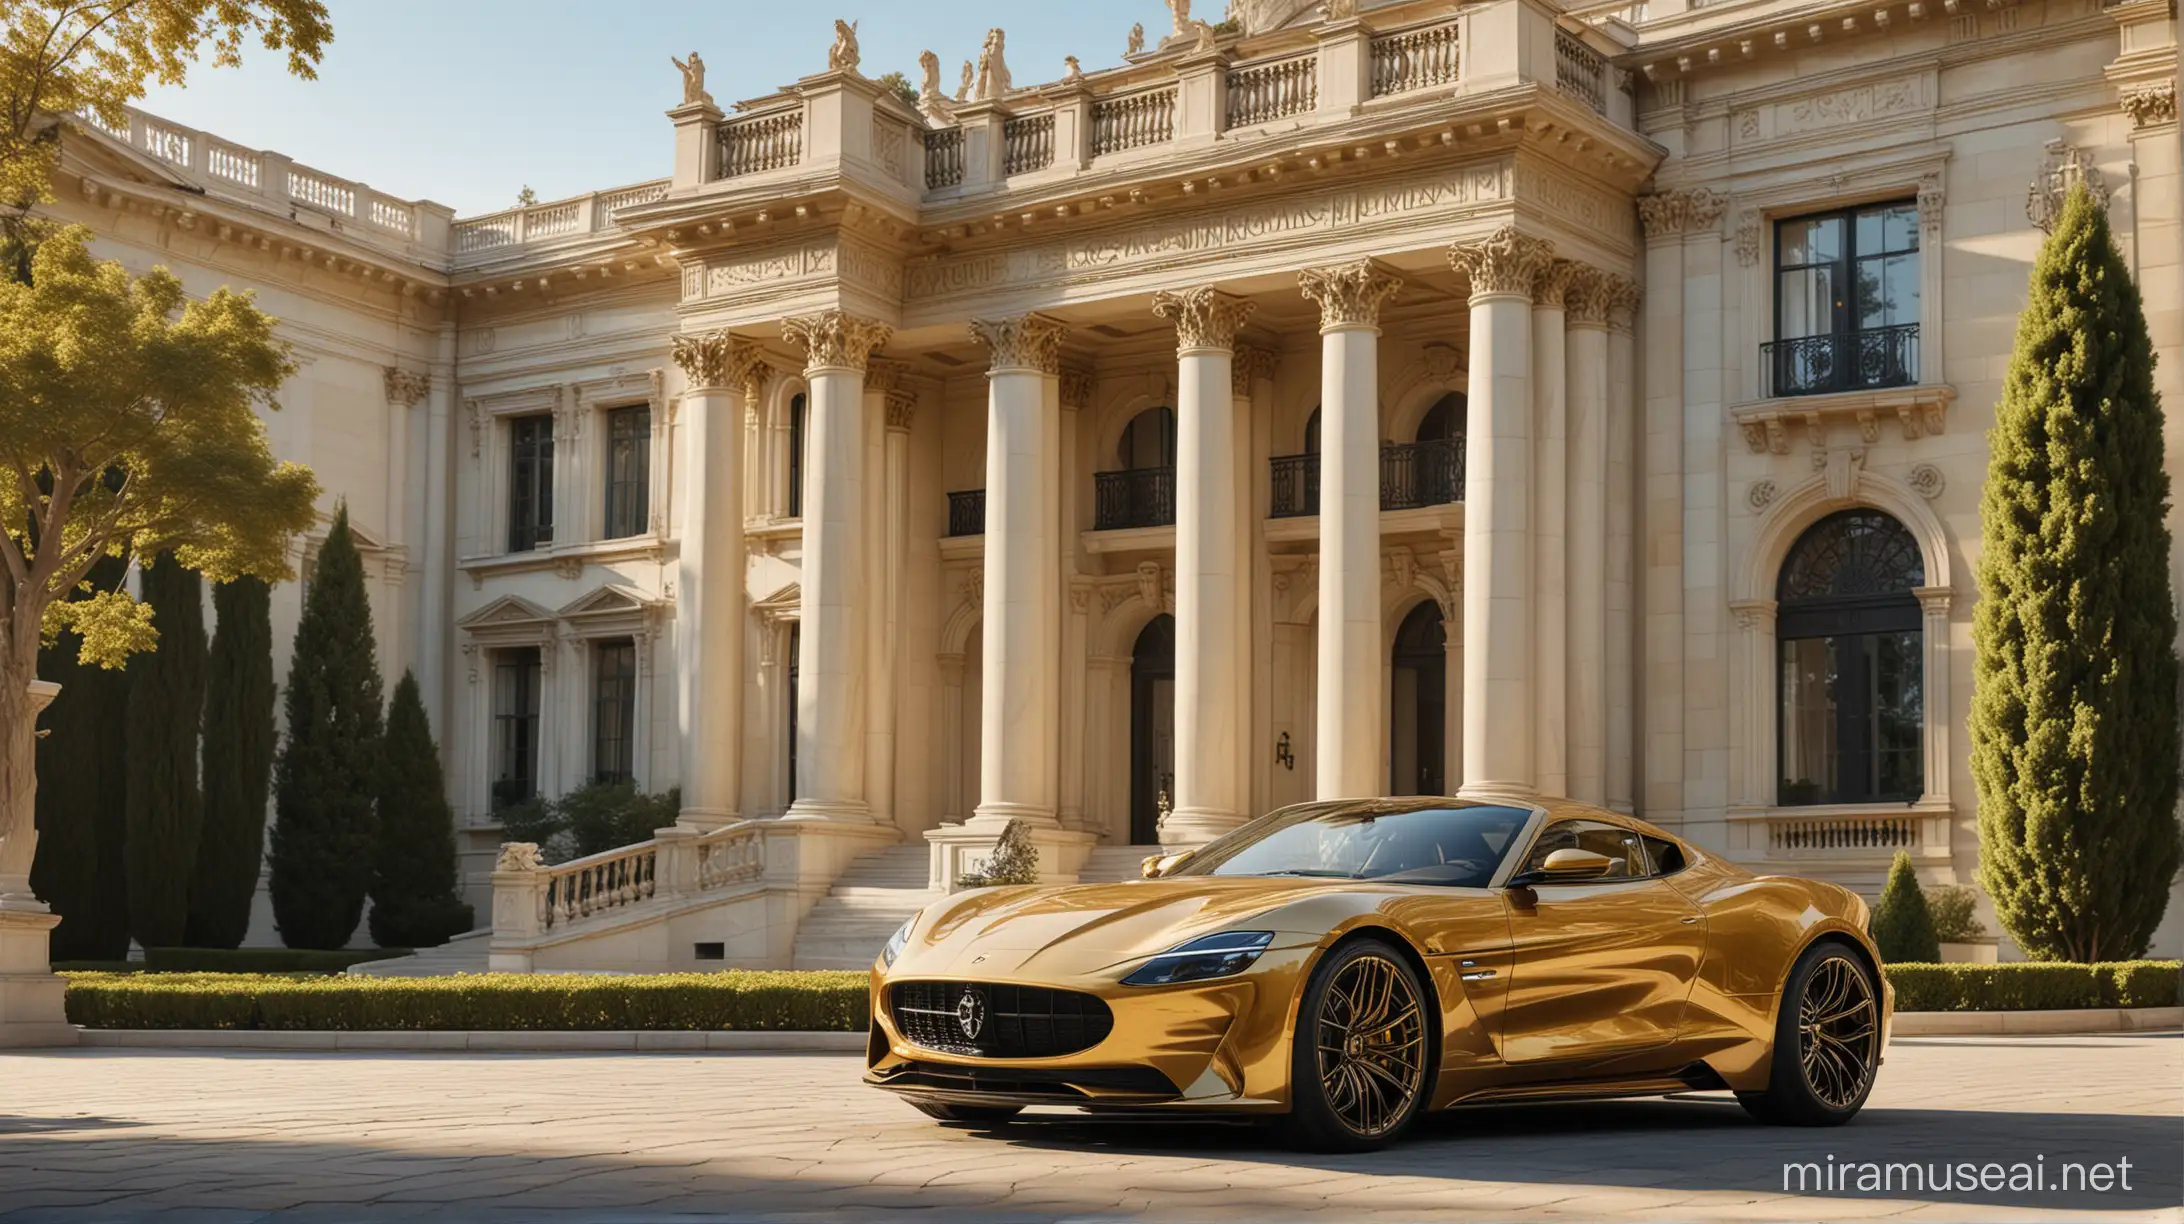 creat image that depicts a luxurious scene where a modern, gold-colored sports car is parked in front of an opulent mansion. The mansion is characterized by its classical architecture, featuring tall columns, elaborate moldings, and statues reminiscent of Greco-Roman art. The building itself has multiple levels, with balconies and large windows that suggest a grand interior space. The vehicle is sleek with an aerodynamic design, indicating it is likely a high-performance car.

The setting appears to be during the day with sunlight casting soft shadows on the ground, enhancing the reflective surfaces of both the car and the polished floor on which it stands. There are trees and a clear blue sky in the background, which contribute to the serene and exclusive atmosphere of the image.

To create a similar image, the following prompts could be used:

"Create a 3D rendering of a luxury sports car in a golden hue, reflecting the sunlight, parked on a glossy marble driveway in front of a grand neoclassical mansion with columns, statues, and lush greenery in the background, bathed in warm sunlight."

"Design an ultra-modern sports car with a metallic gold finish. Place it in front of a two-story mansion with classic architectural details like Corinthian columns, ornamental balustrades, and sculpted statues, under a clear blue sky."

"Generate an image of an extravagant scene with a shiny gold sports car in the foreground and an imposing mansion with classical features, including tall white columns and decorative sculptures, set against a backdrop of a sunny day with a few trees."

The description should capture the essence of luxury, modernity, and classical beauty that is evident in the image.

